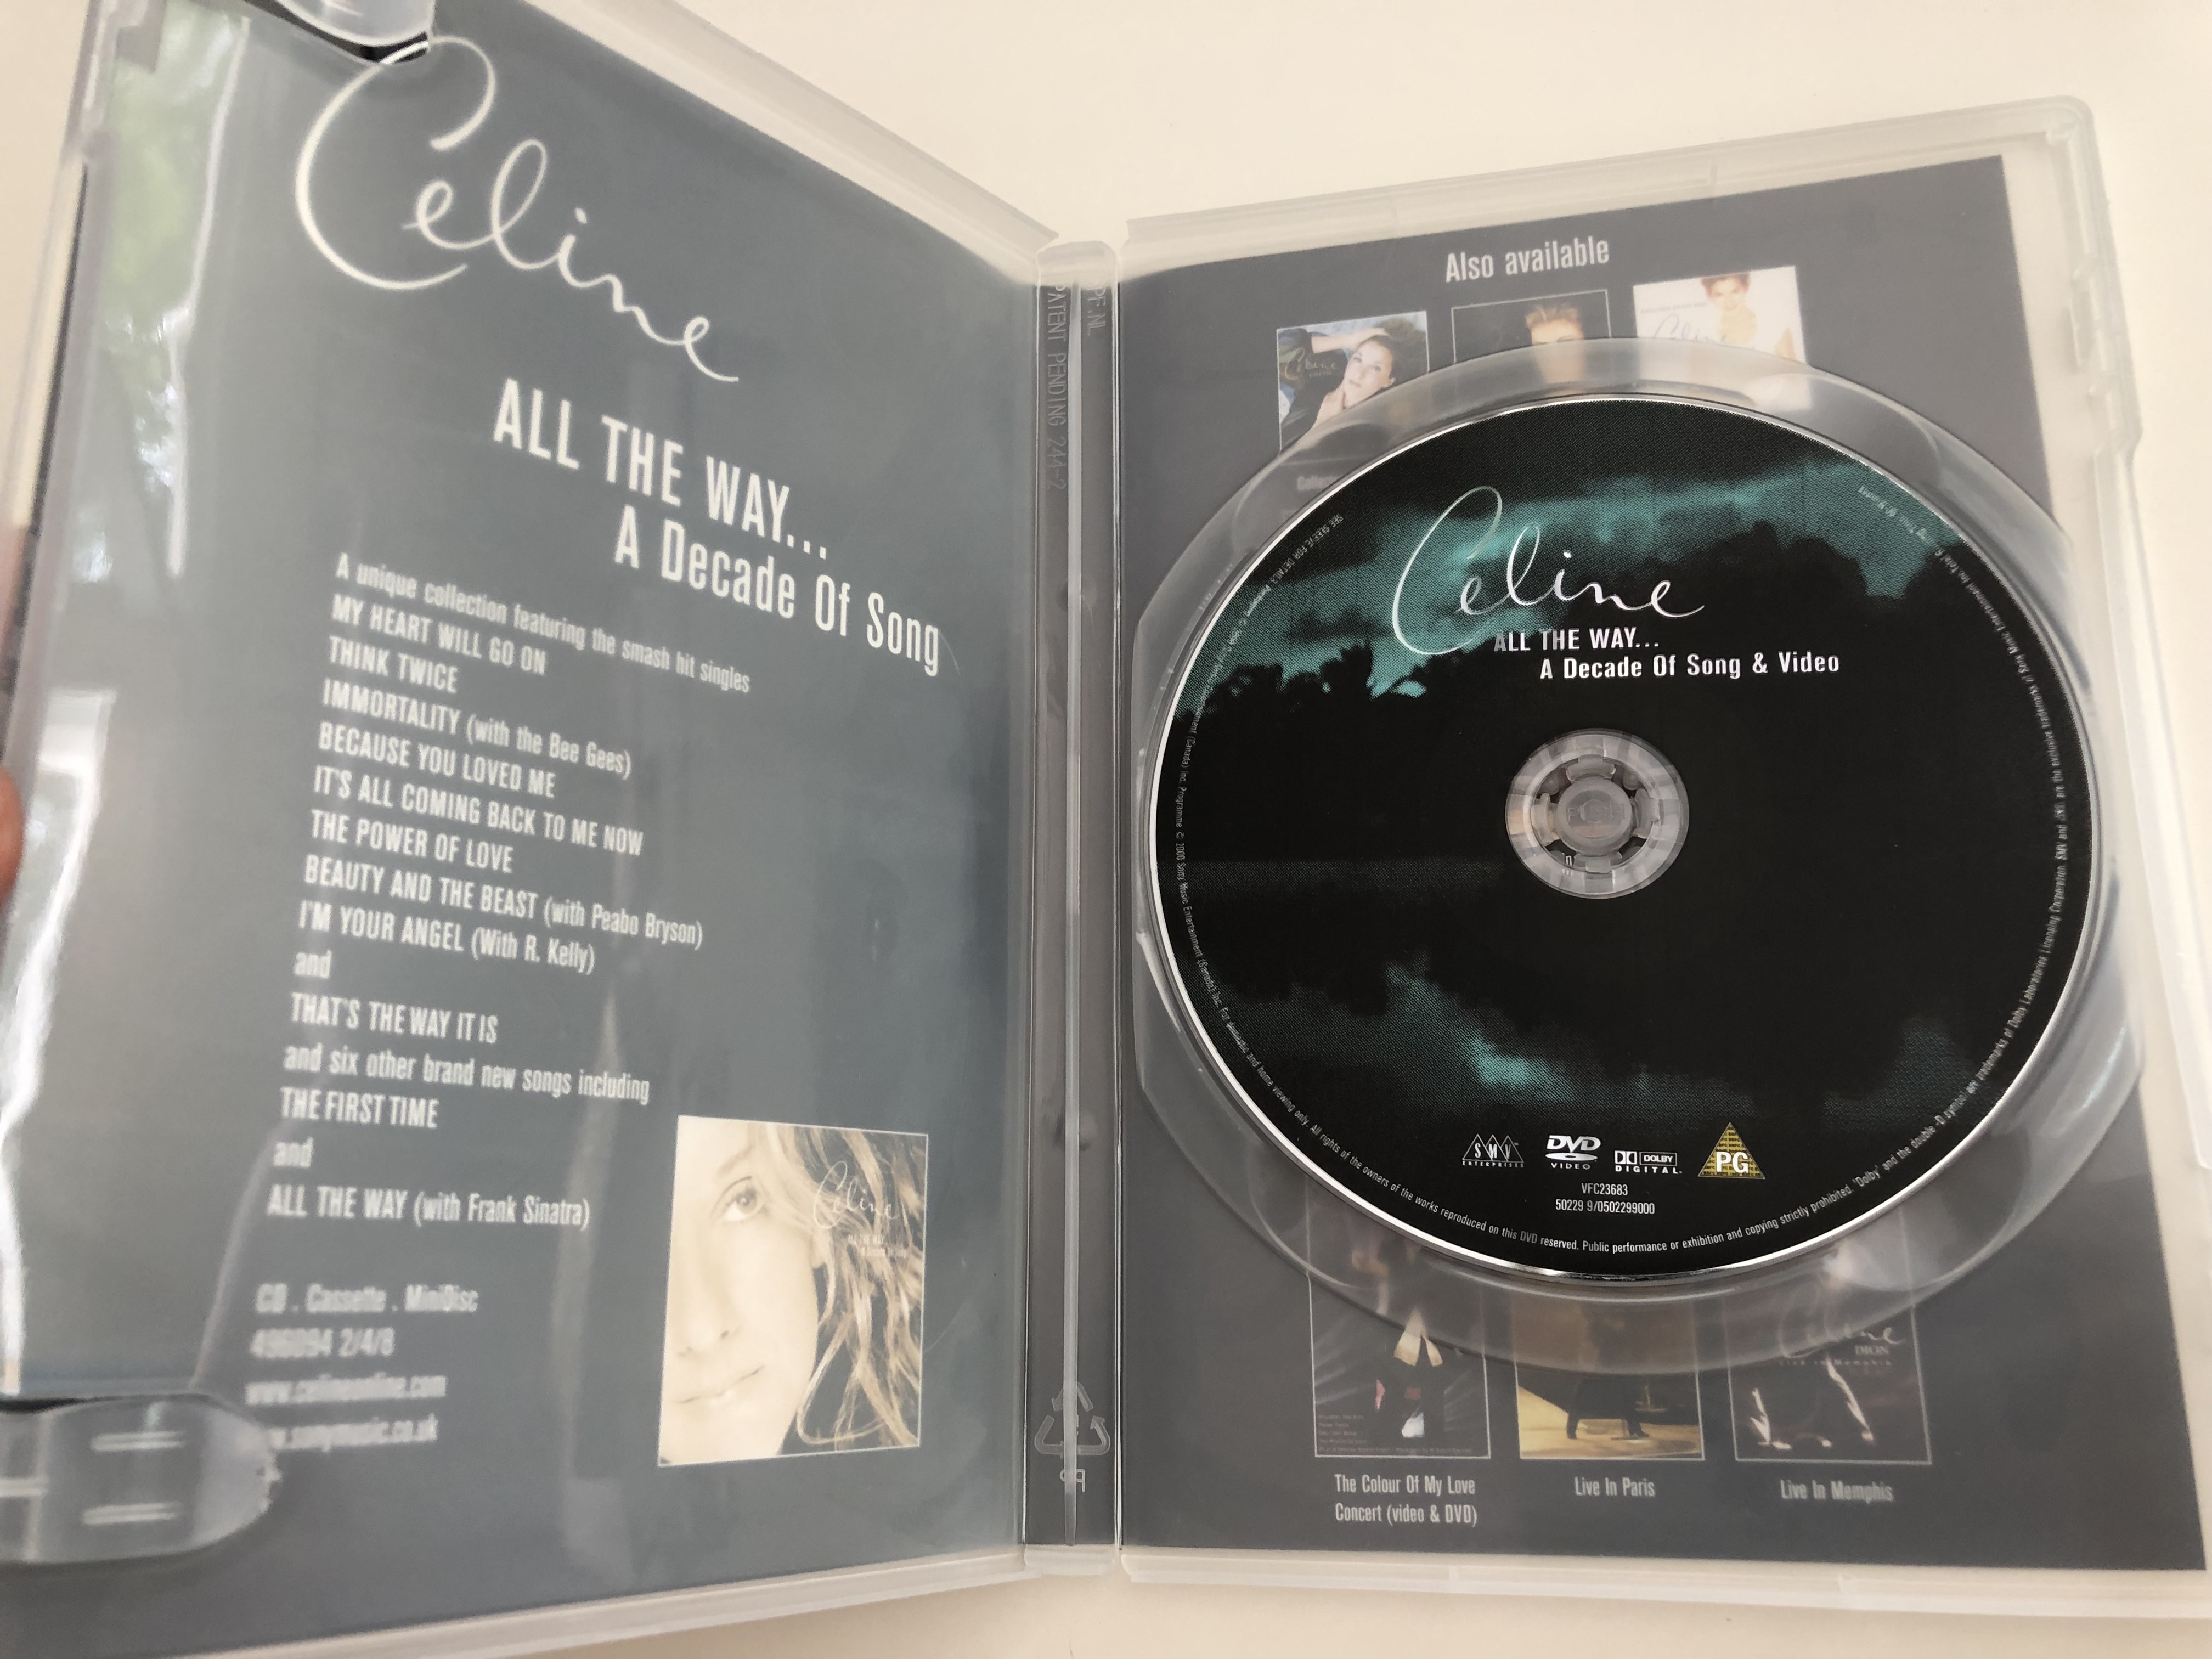 celine-dion-all-the-way-dvd-2000-a-decade-of-song-video-sony-music-50229-9-2-.jpg